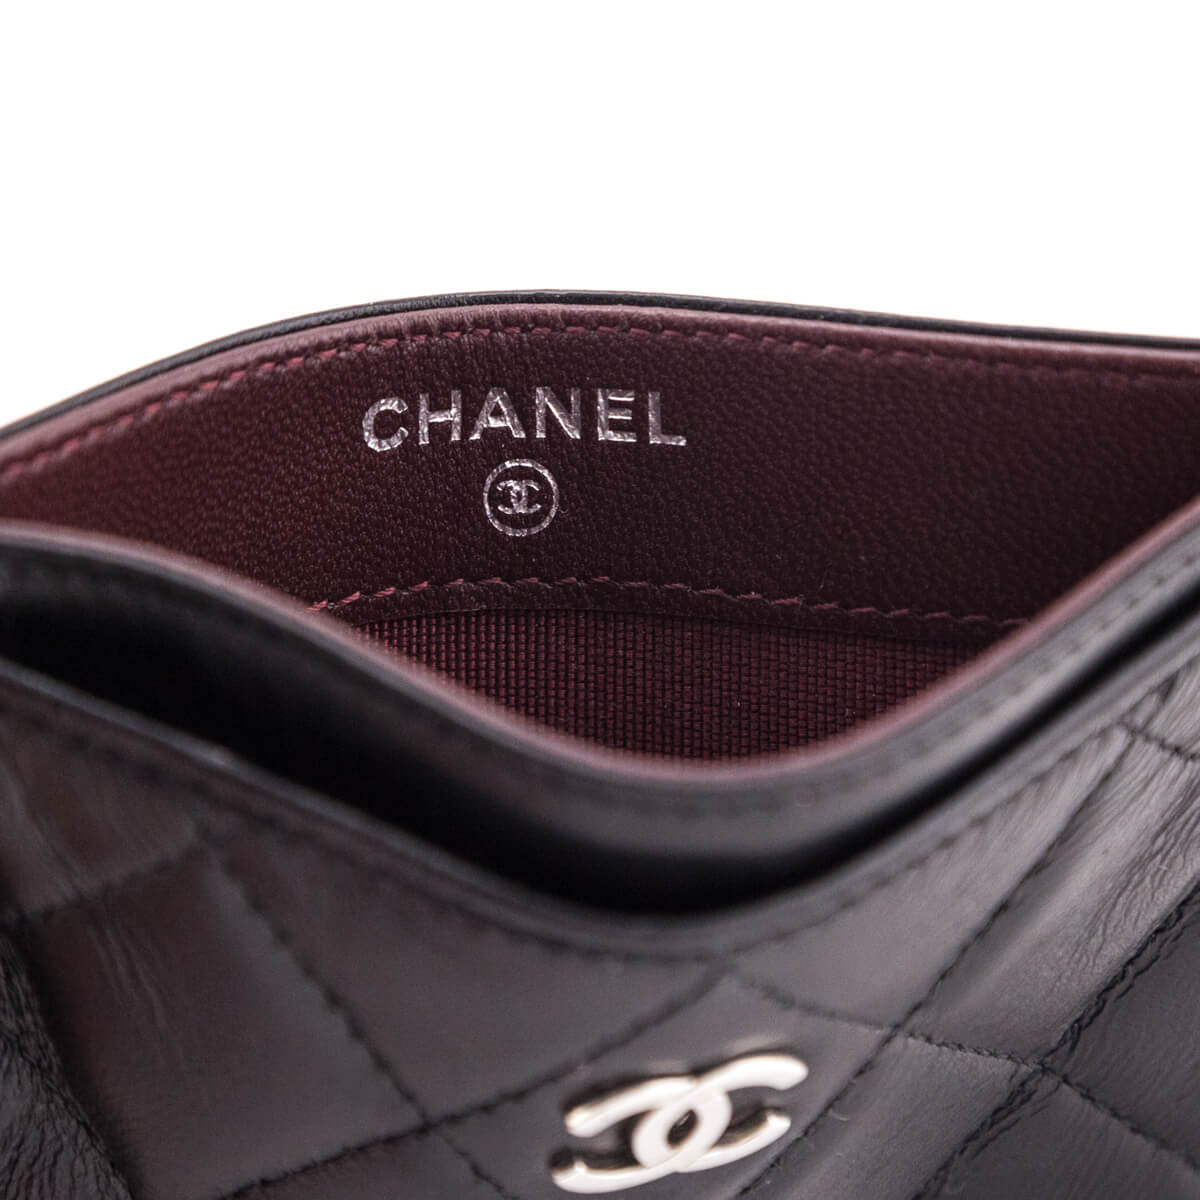 Chanel Black Lambskin Card Holder - Love that Bag etc - Preowned Authentic Designer Handbags & Preloved Fashions